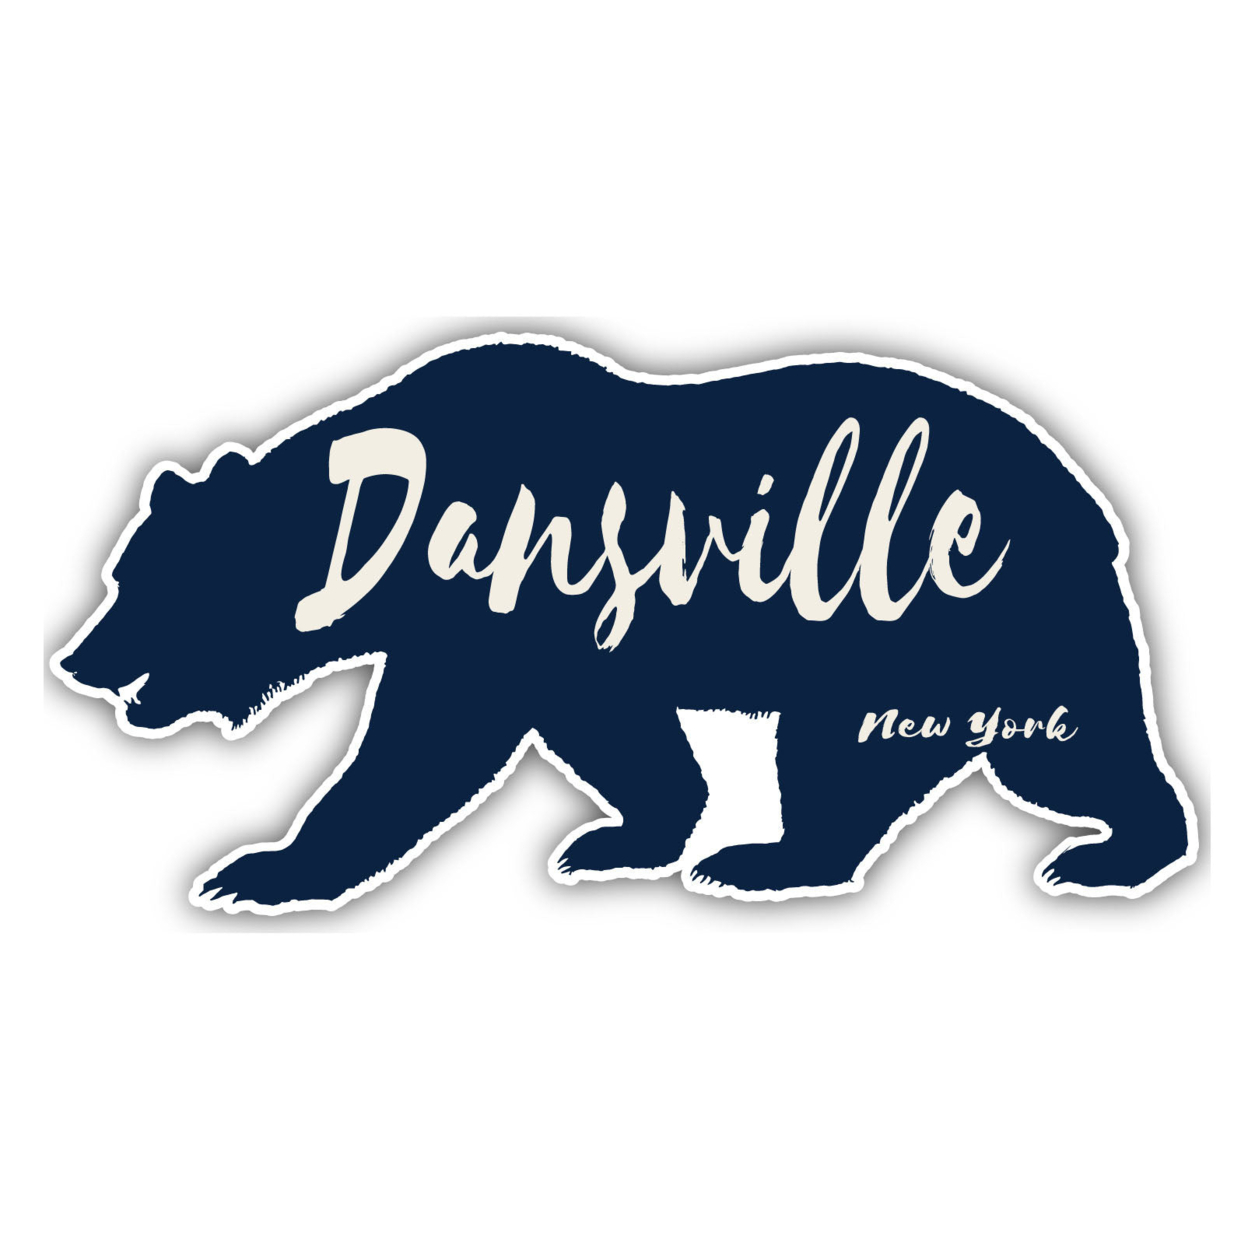 Dansville New York Souvenir Decorative Stickers (Choose Theme And Size) - 4-Pack, 8-Inch, Bear